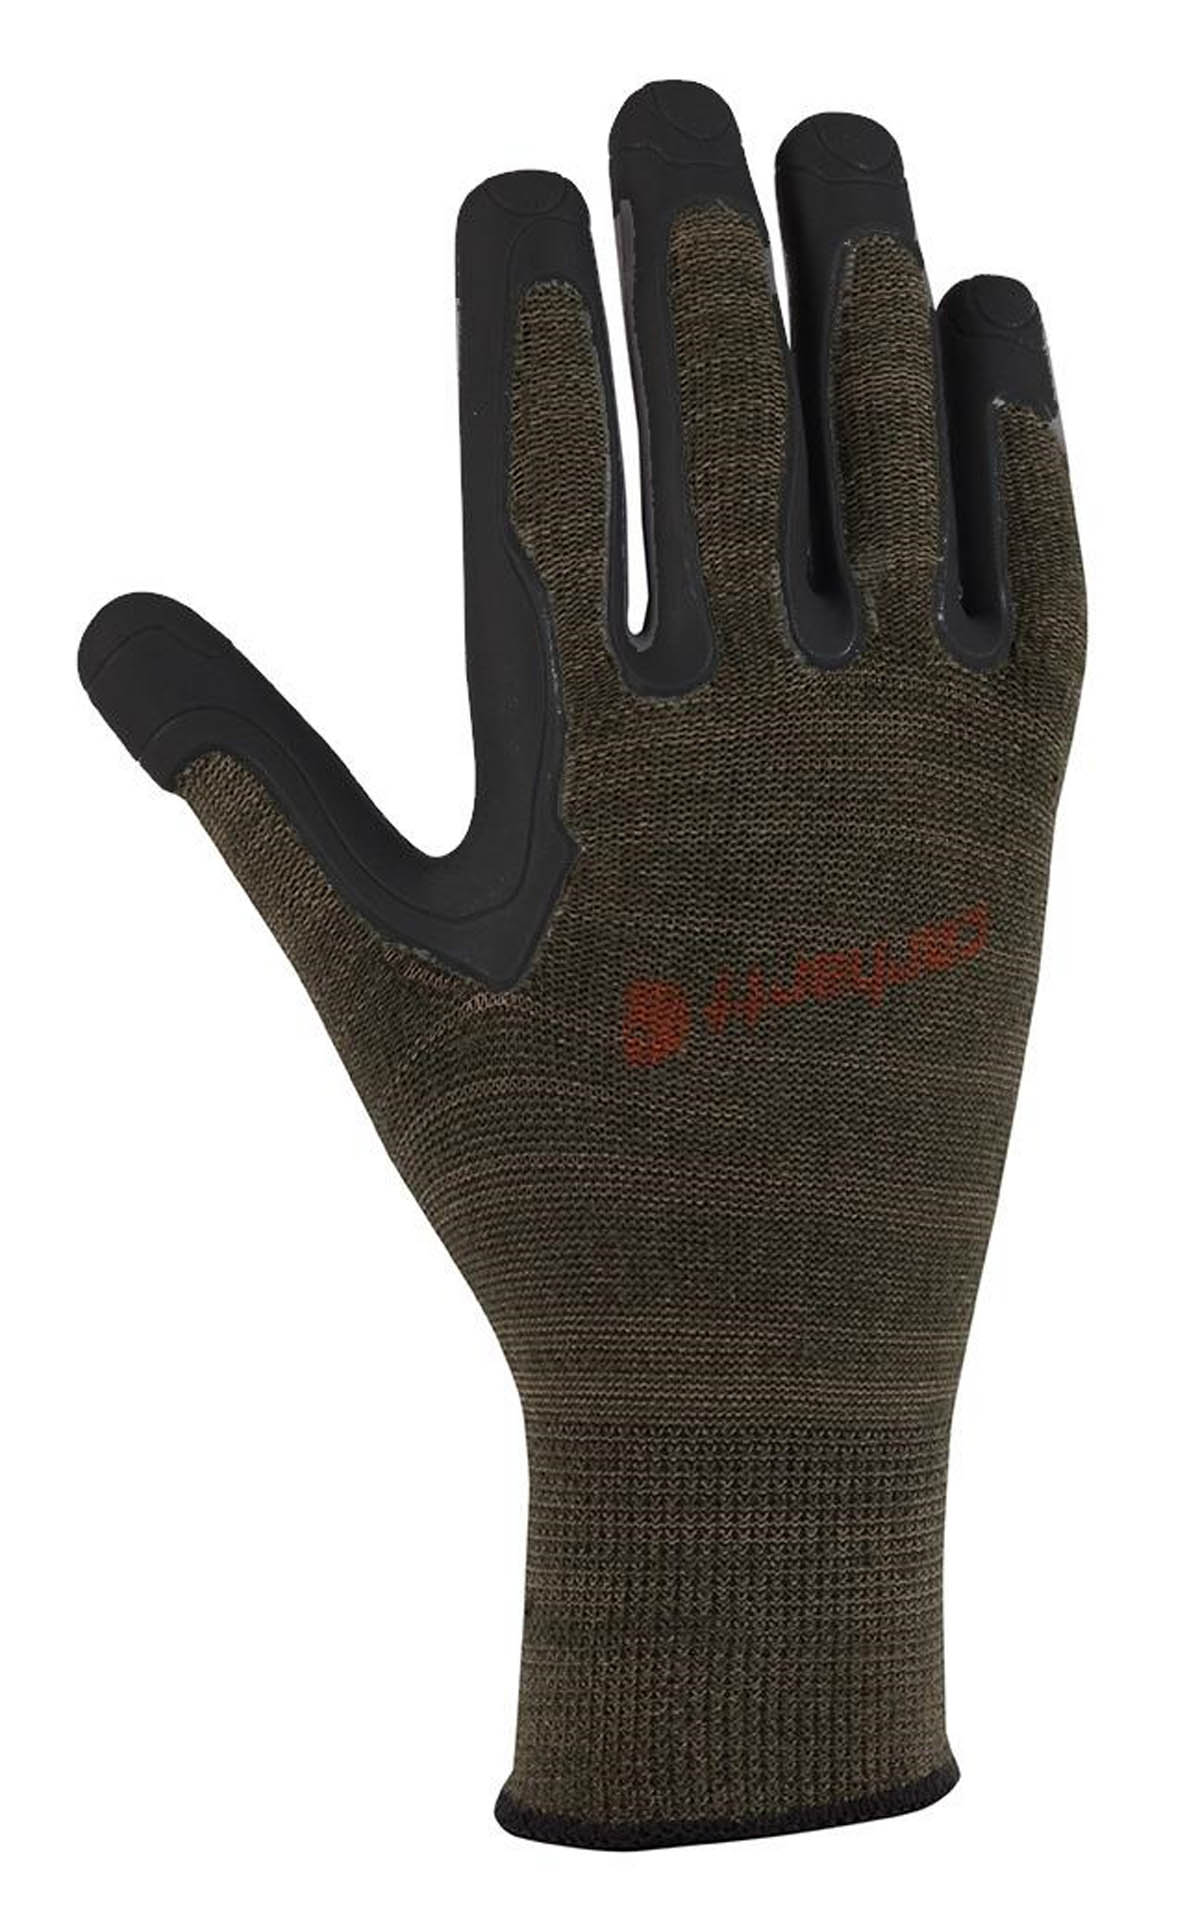 Carhartt Men's Pro Palm Discontinued Pricing